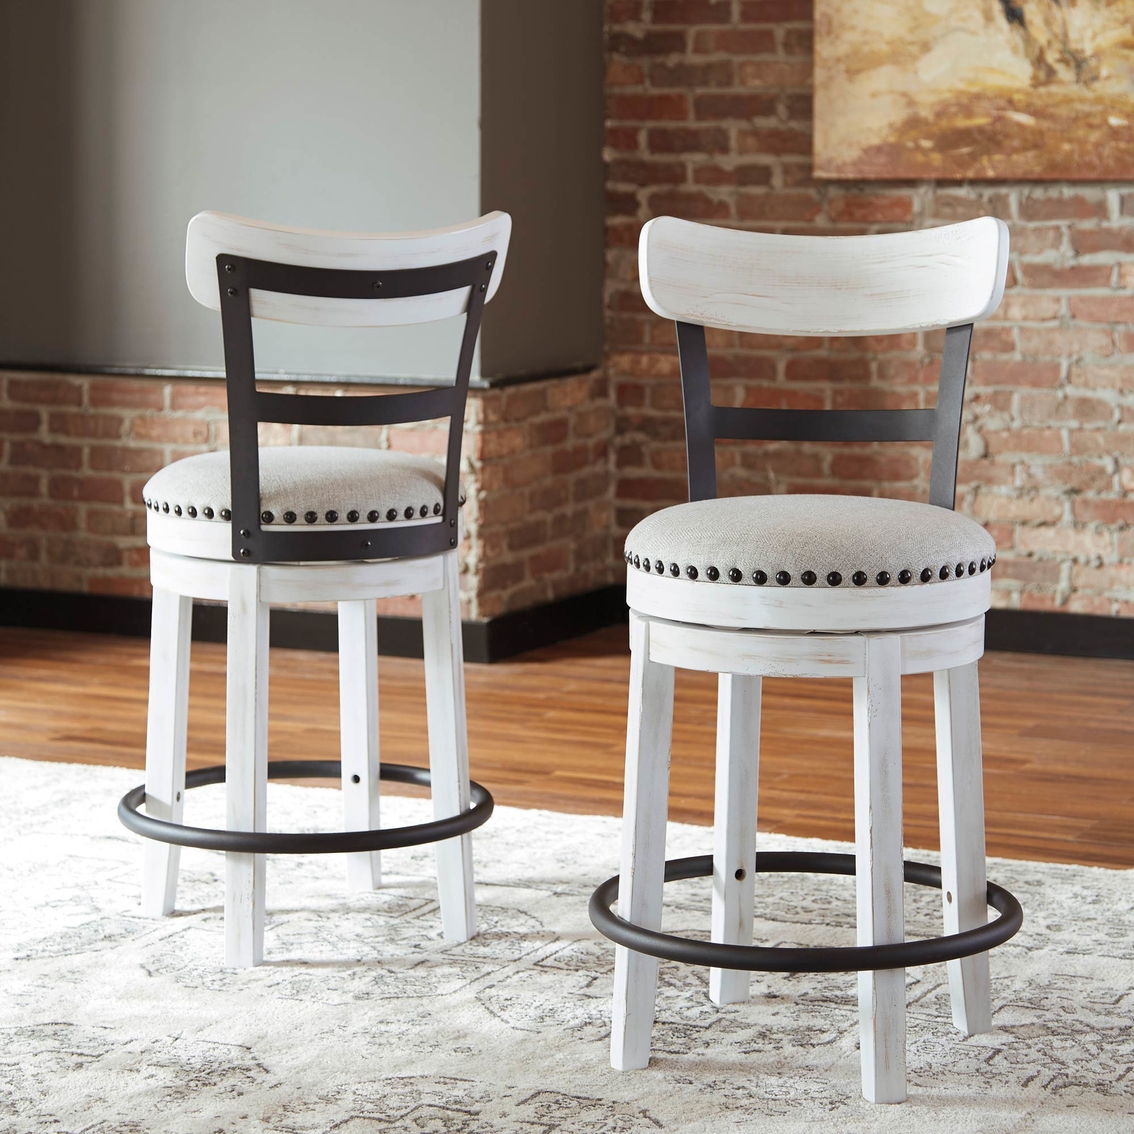 Signature Design by Ashley Valebeck 5 pc. Counter Table with 4 White Stools - Image 3 of 4